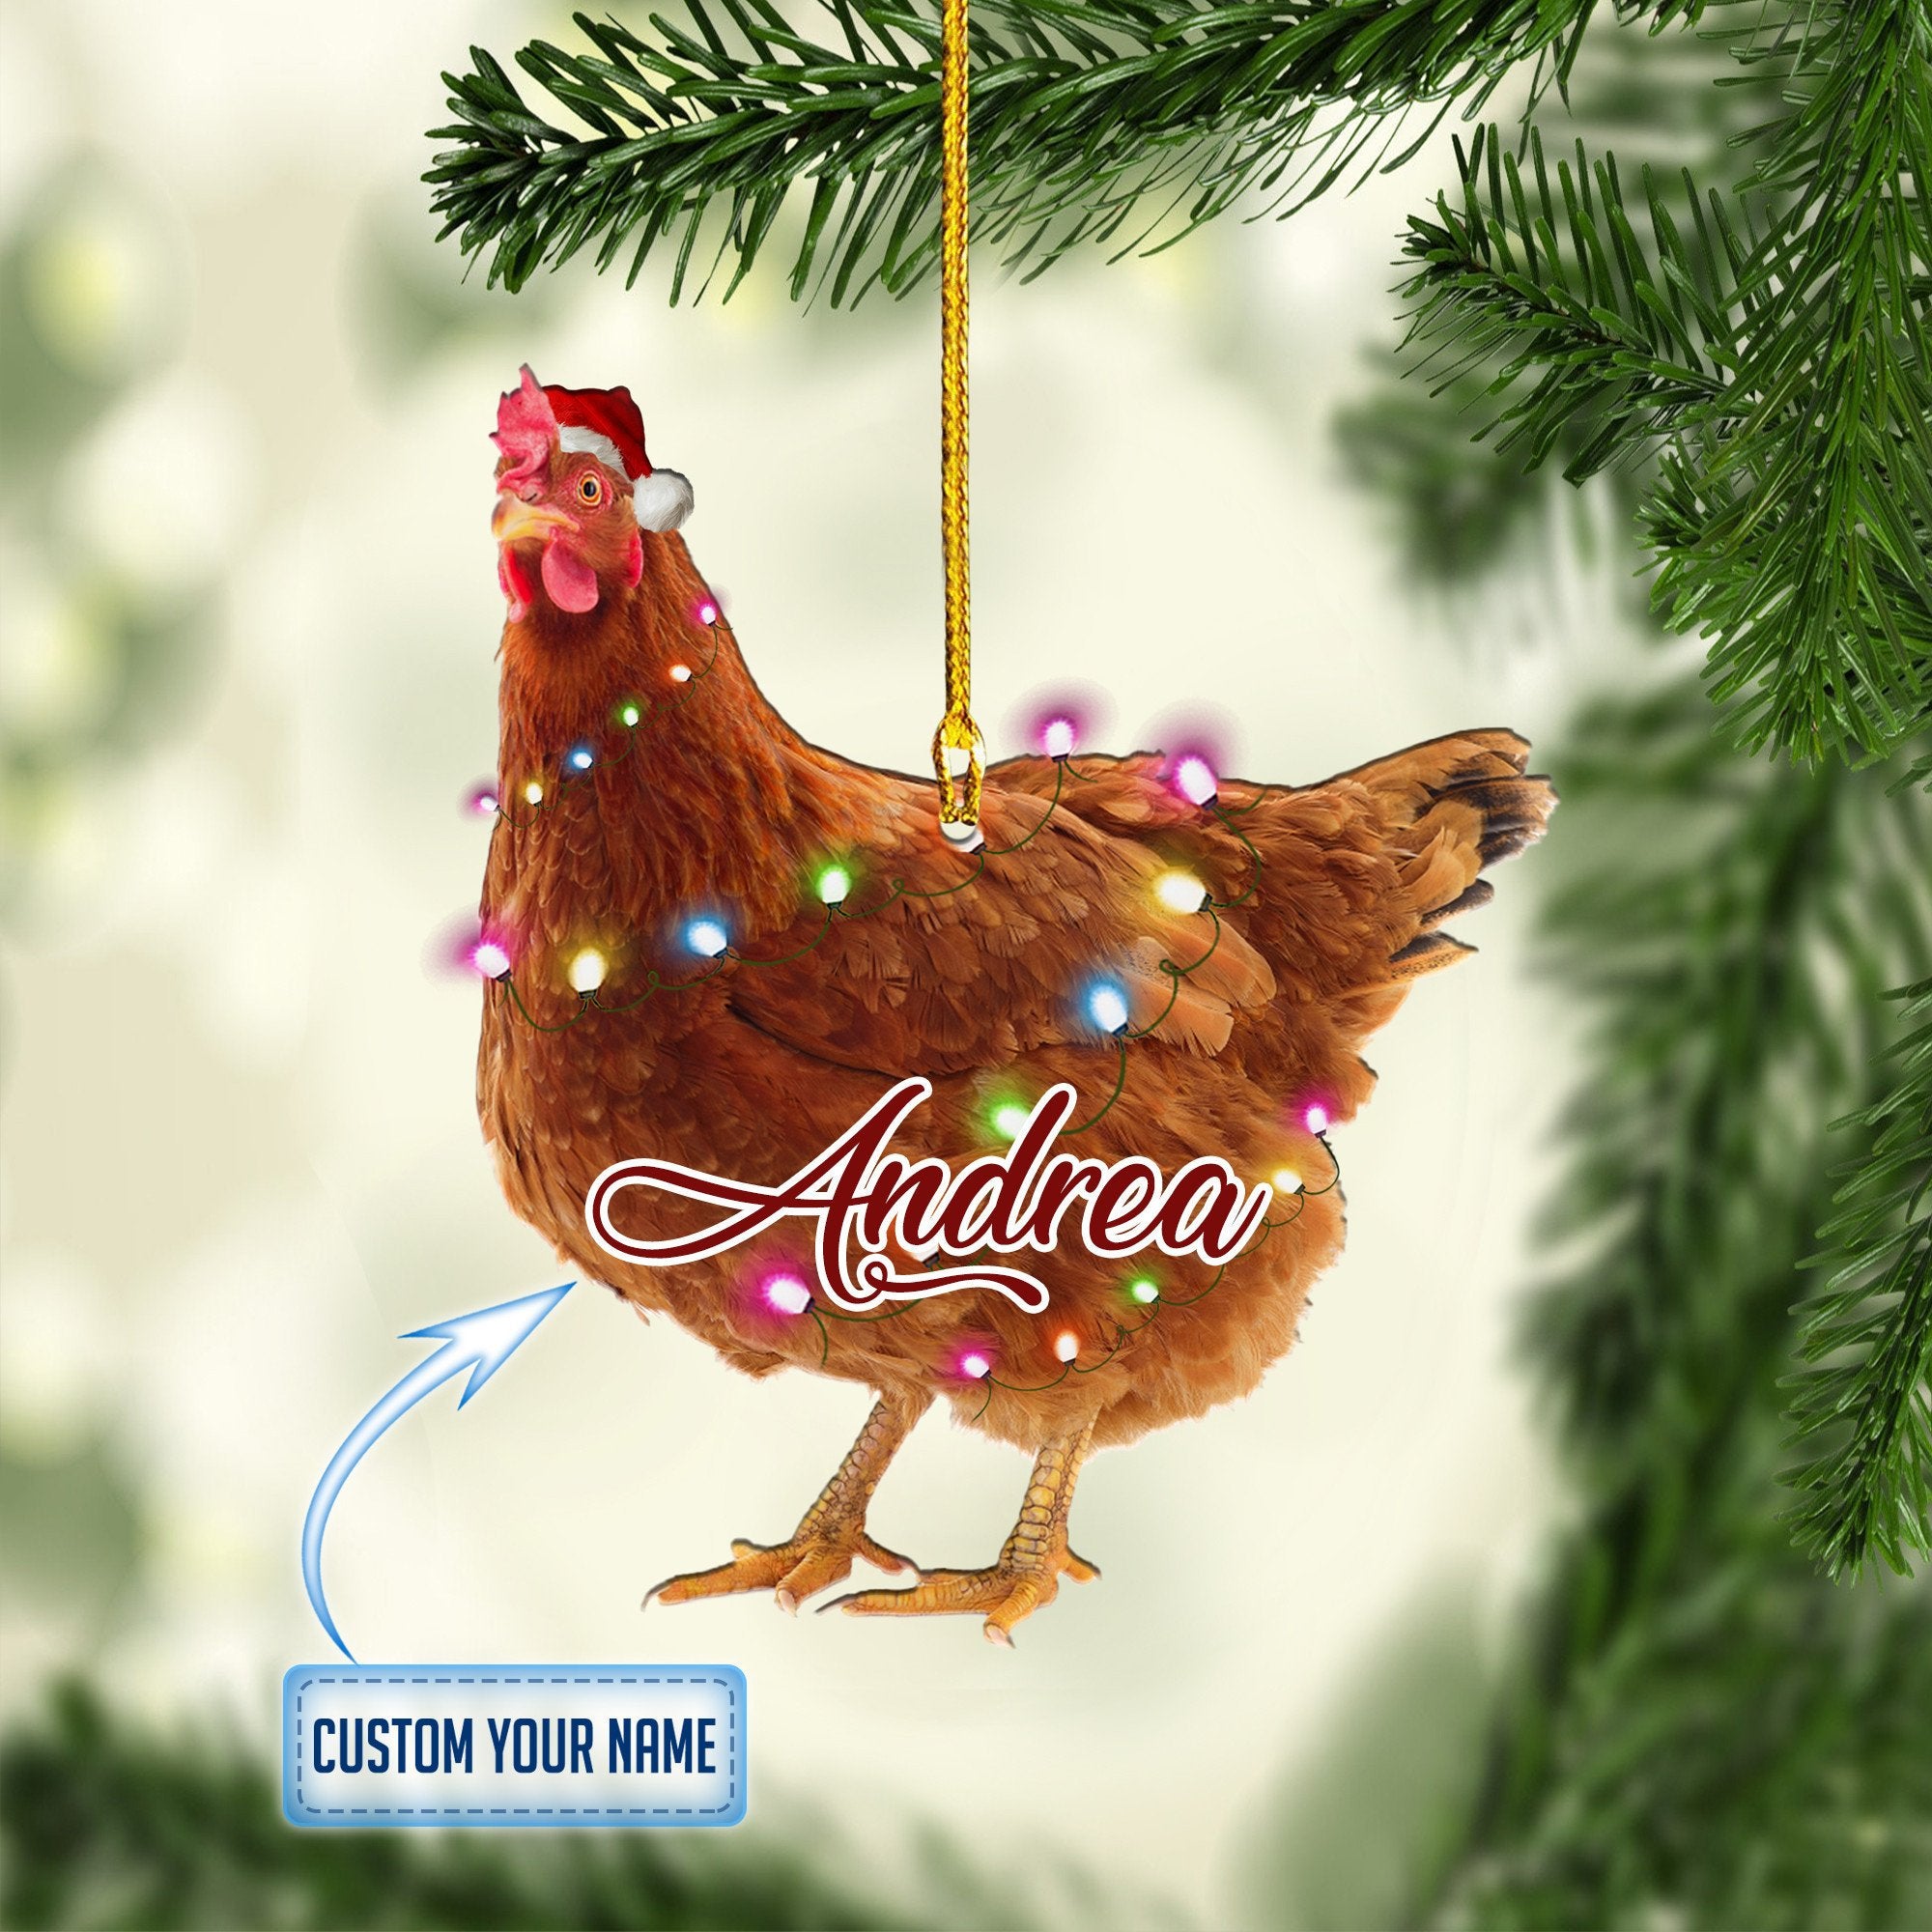 Personalized Chicken Merry Christmas Ornaments/ Best Gift for Chicken Lovers/ Farm Gift Christmas Ornament